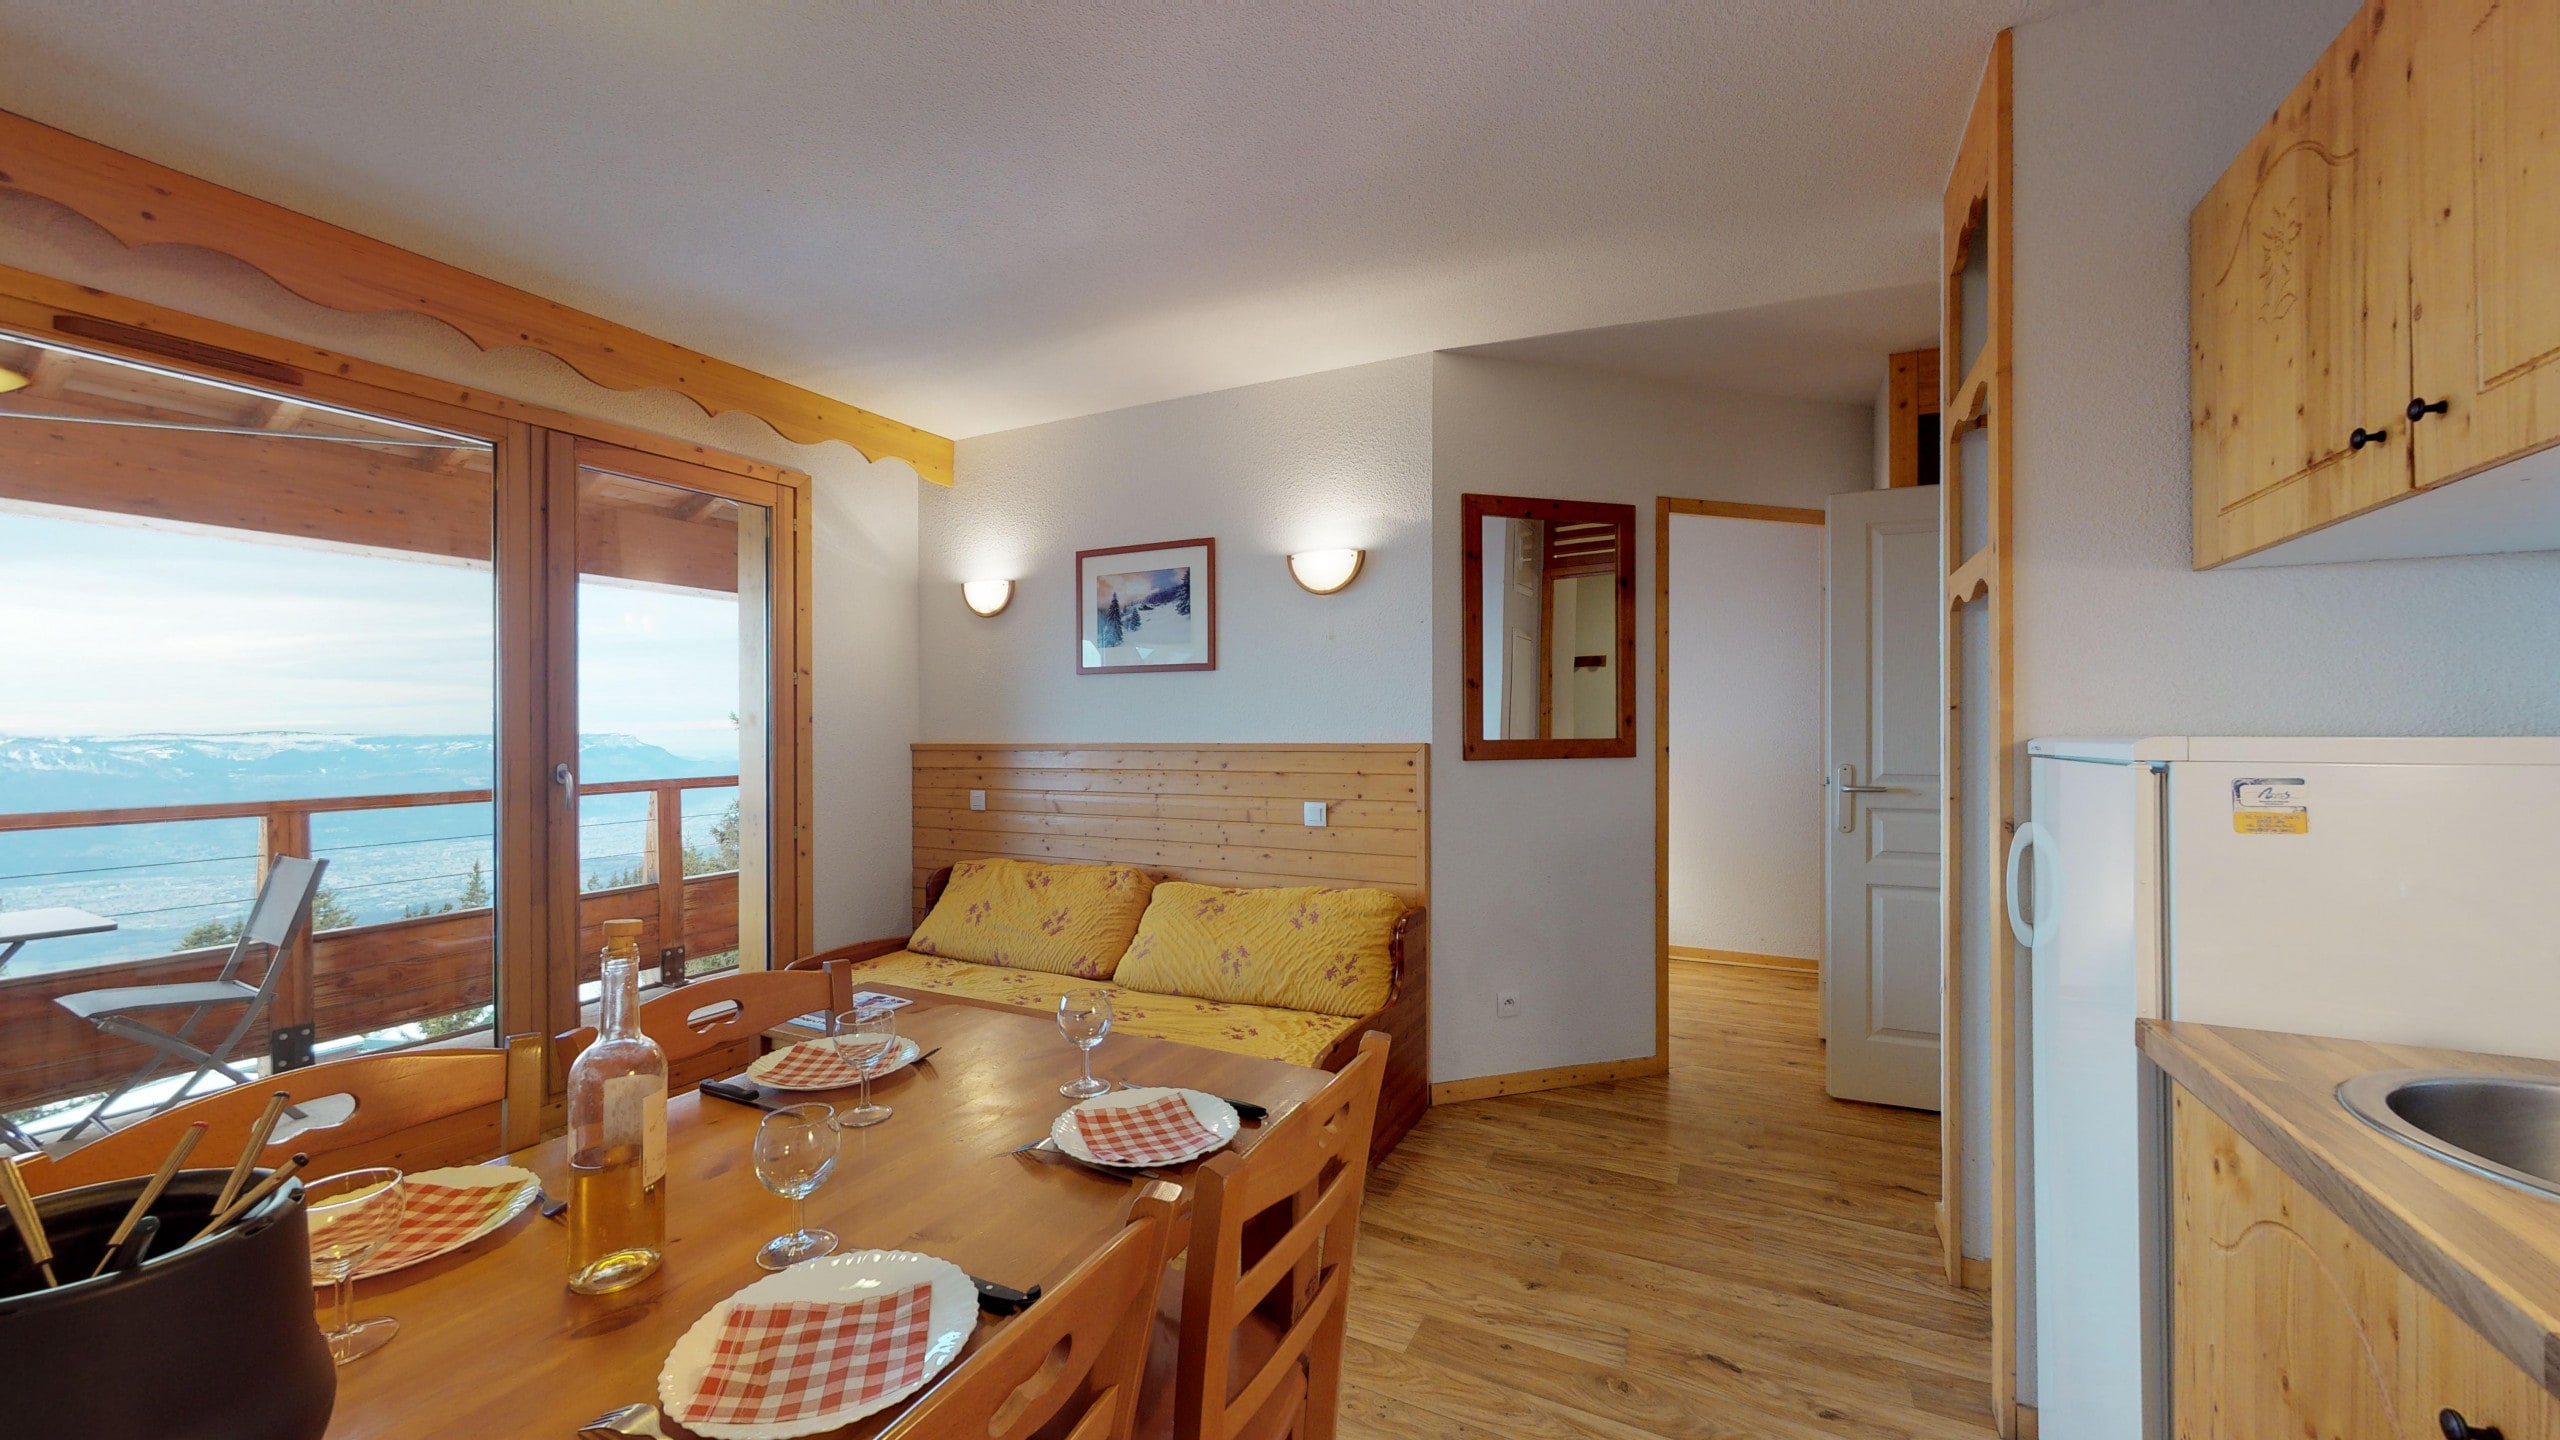 2 rooms 6 persons mountain view and view of the ski slopes - Apartements Chartreuse 1 028-FAMILLE & MONTAGNE appart. 6 pers - Chamrousse